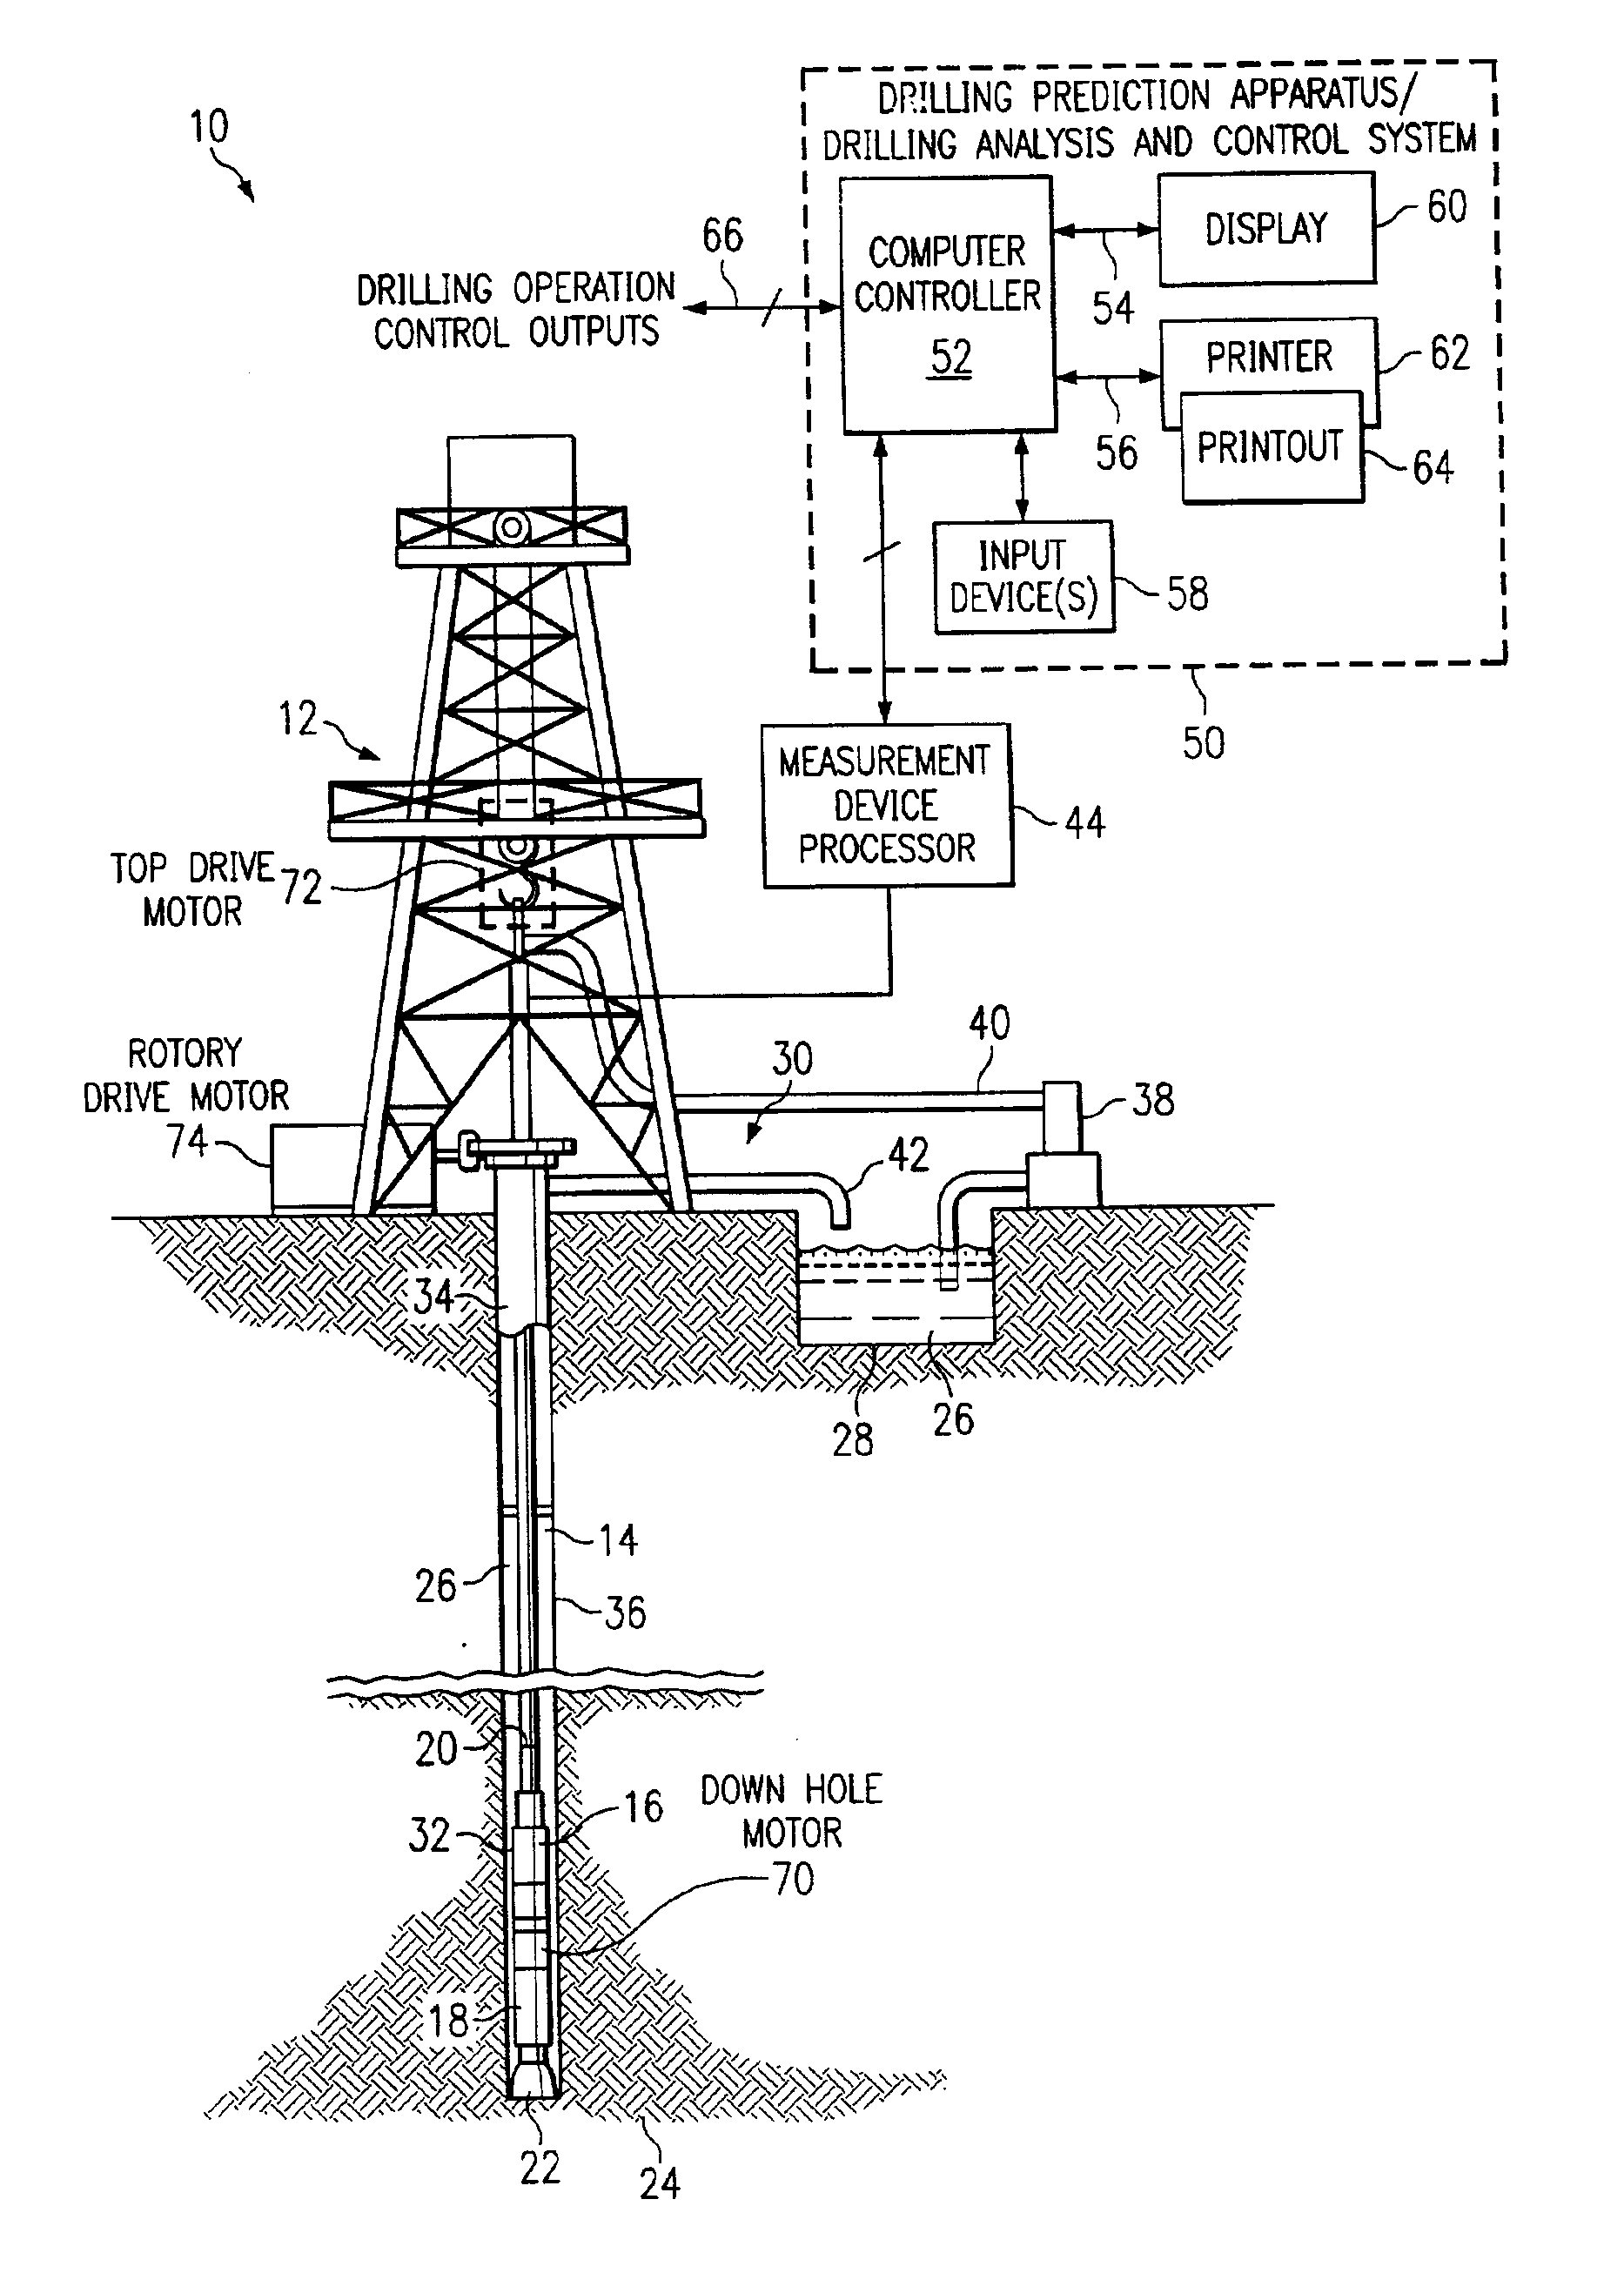 Method and system for predicting performance of a drilling system of a given formation